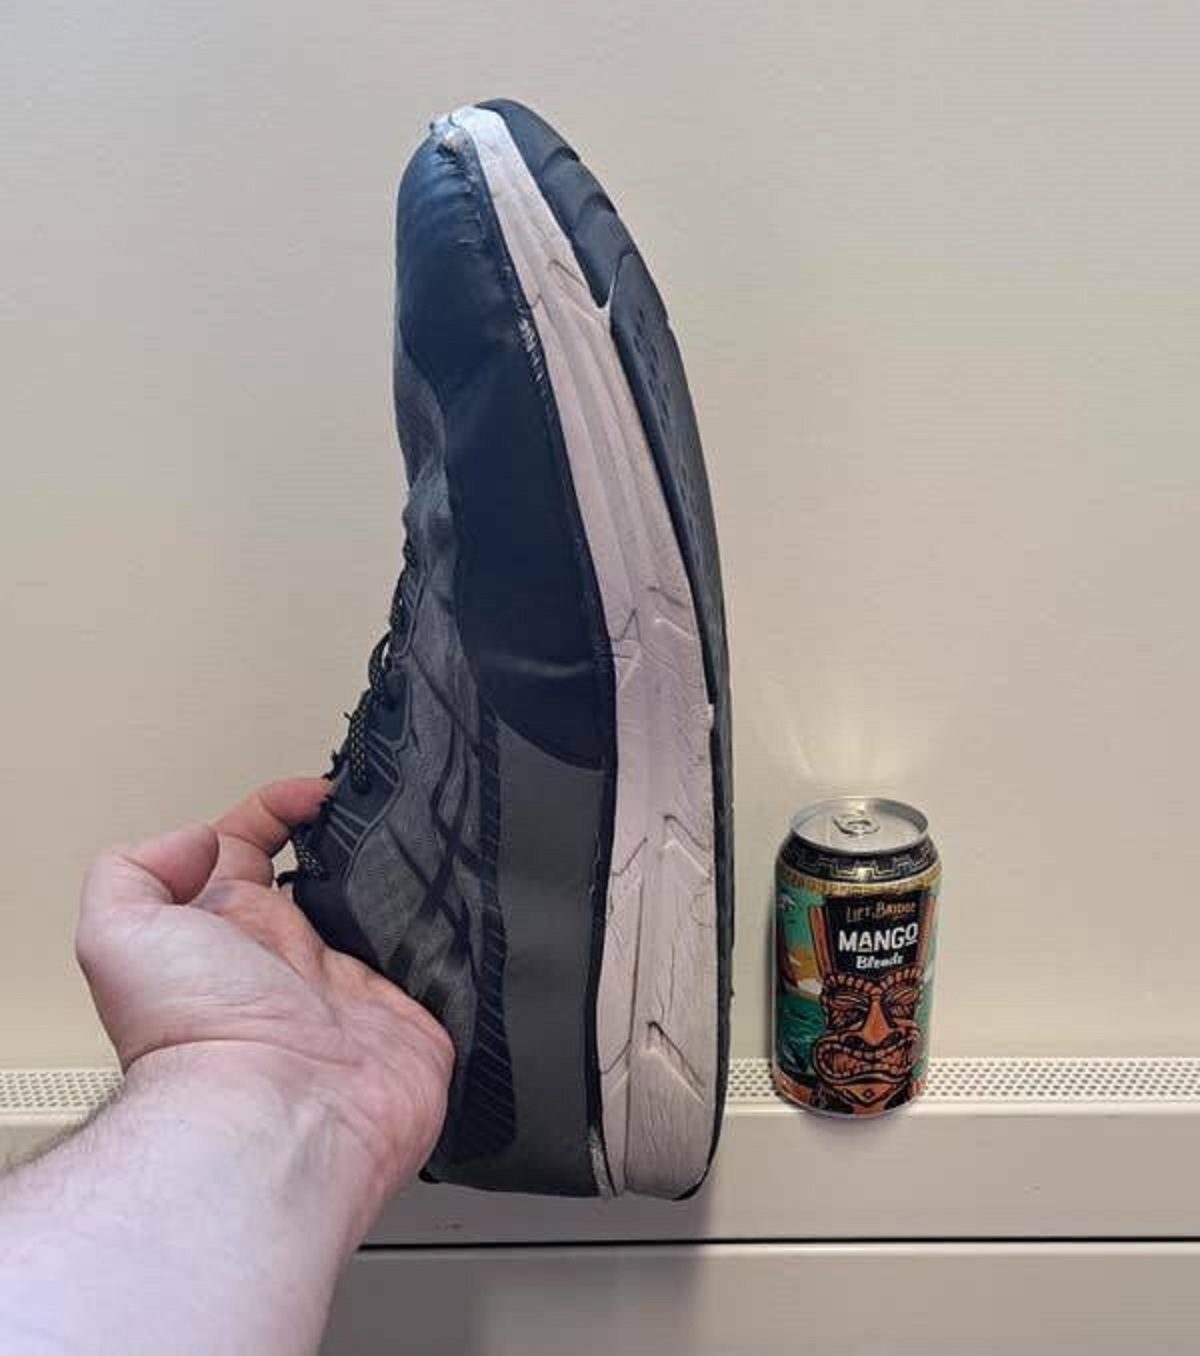 This is how big a size 18 shoe is compared with a can of soda: